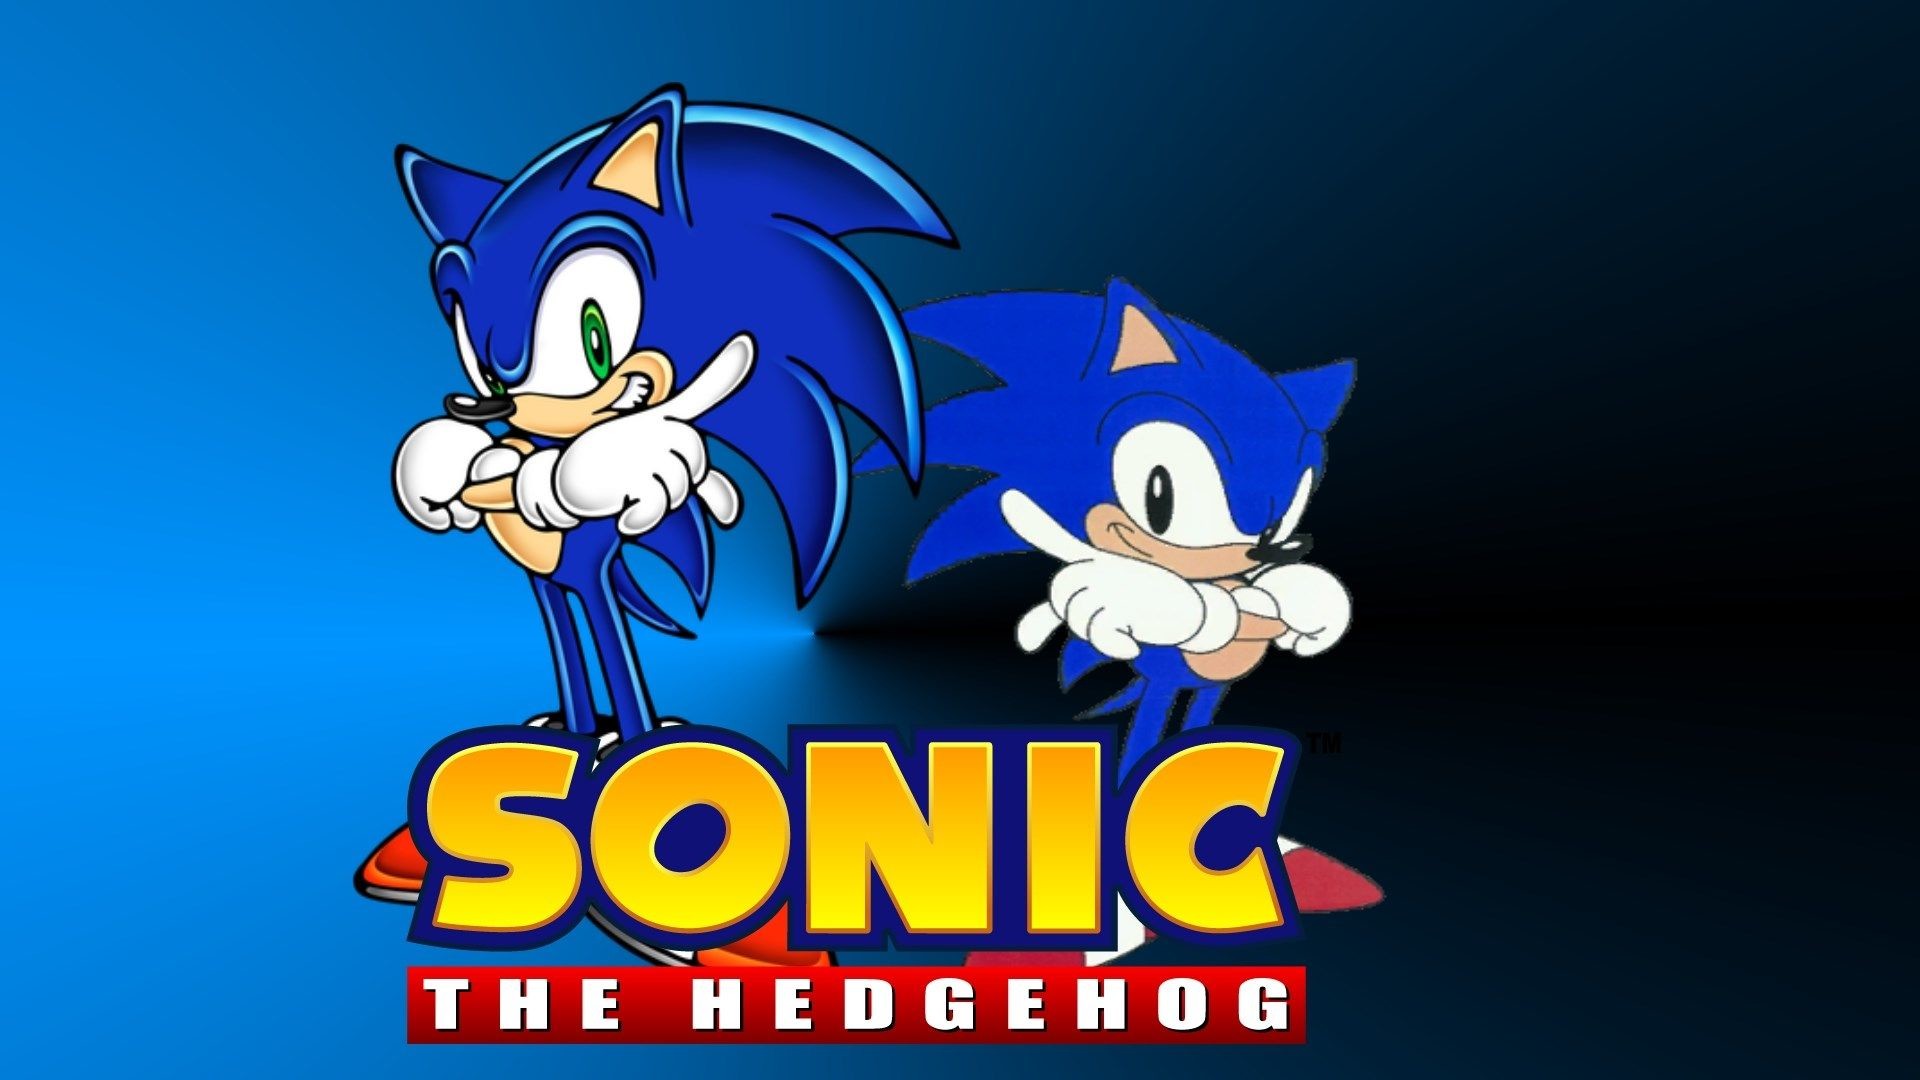 1920x1080 Backgrounds High Resolution: sonic the hedgehog backround (Childers Waite  )